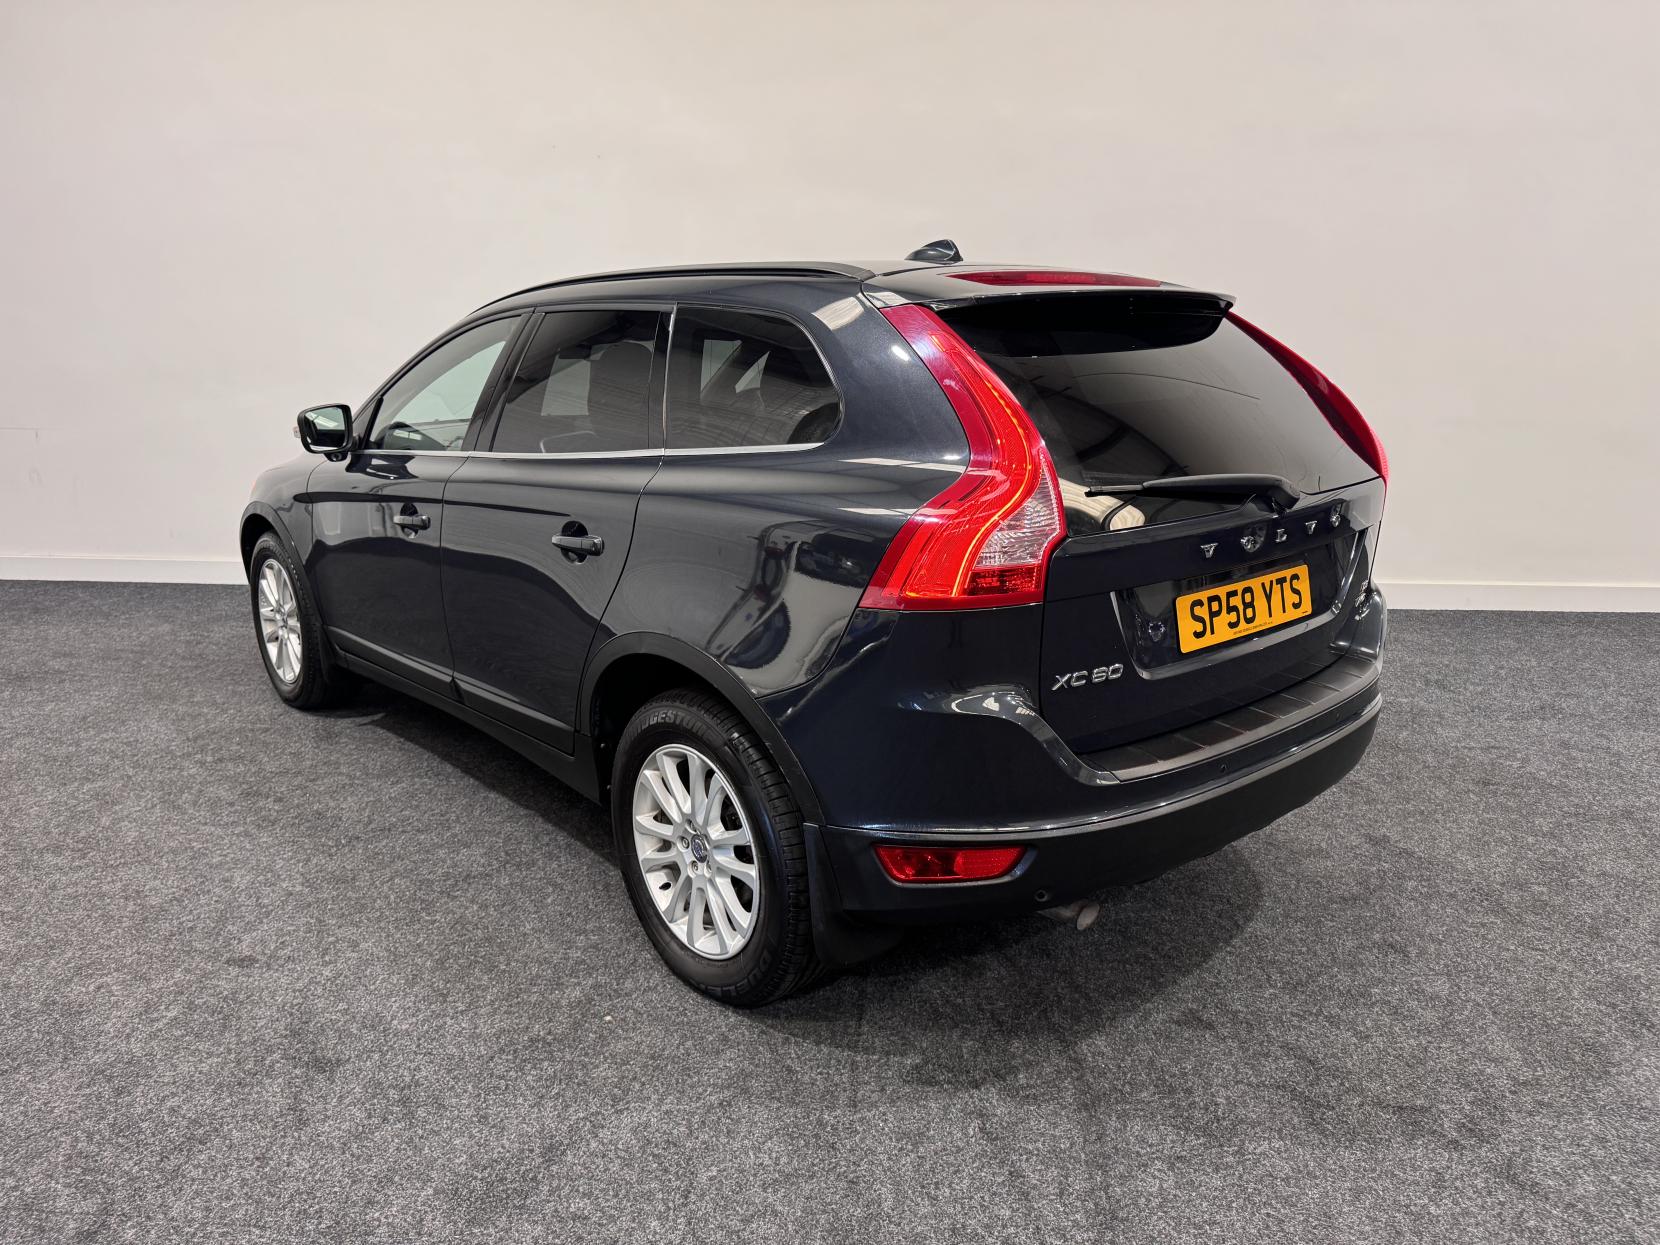 Volvo XC60 2.4 D5 SE Lux SUV 5dr Diesel Geartronic AWD Euro 4 (185 ps)